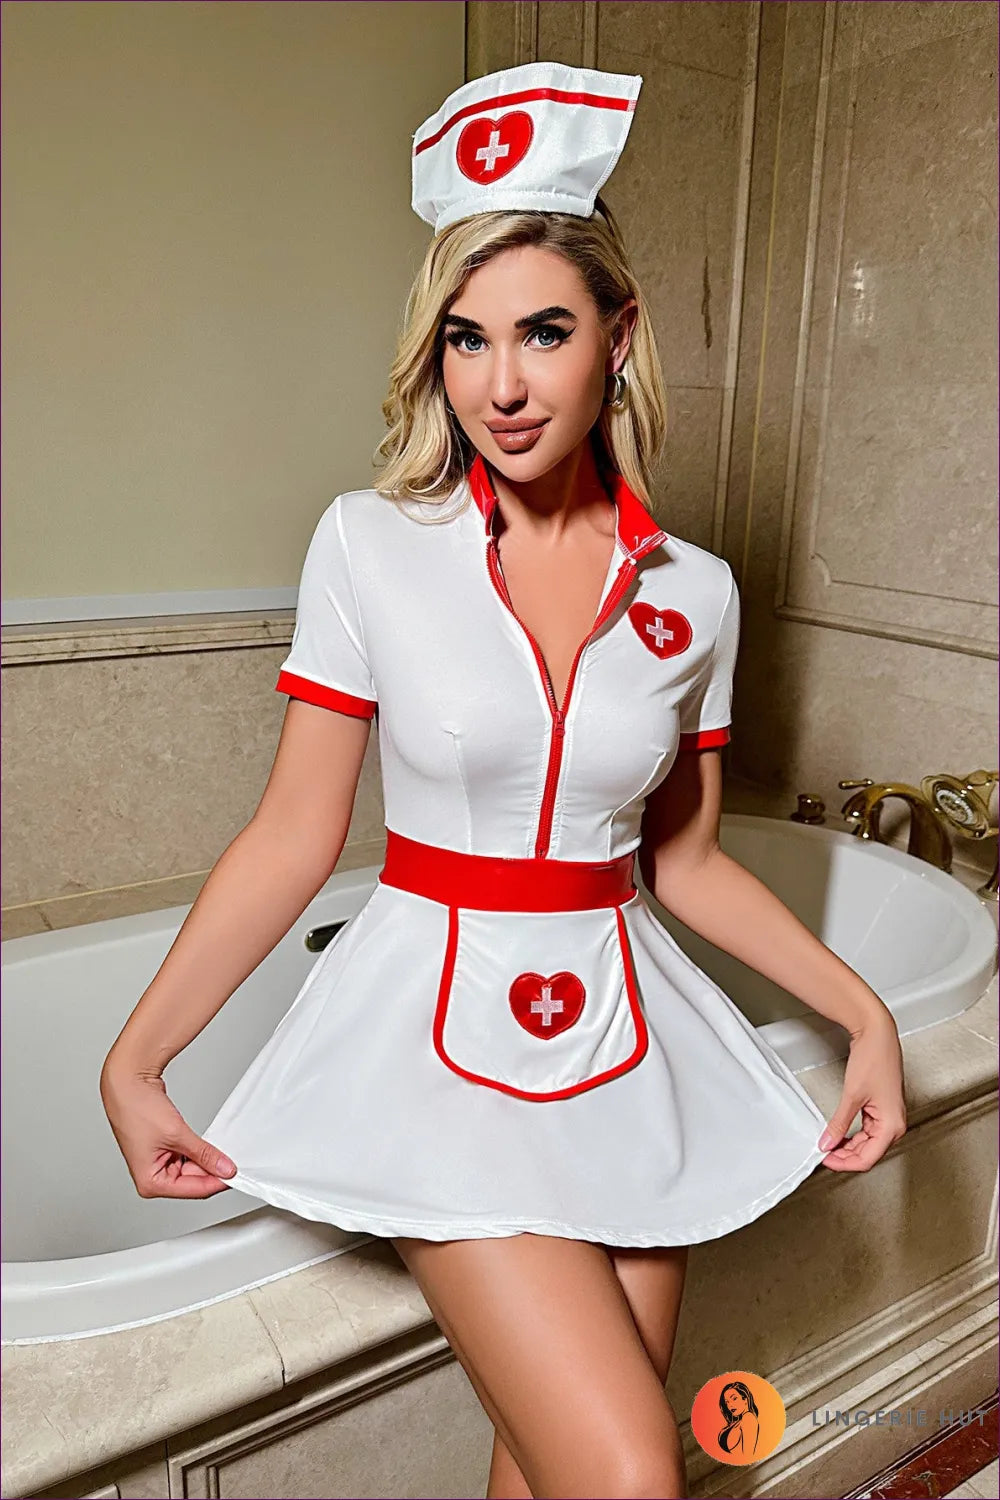 Step Into a World Of Fantasy With Lingerie Hut’s Sexy Role Play Nurses Uniform. Zipper Detail And Solid